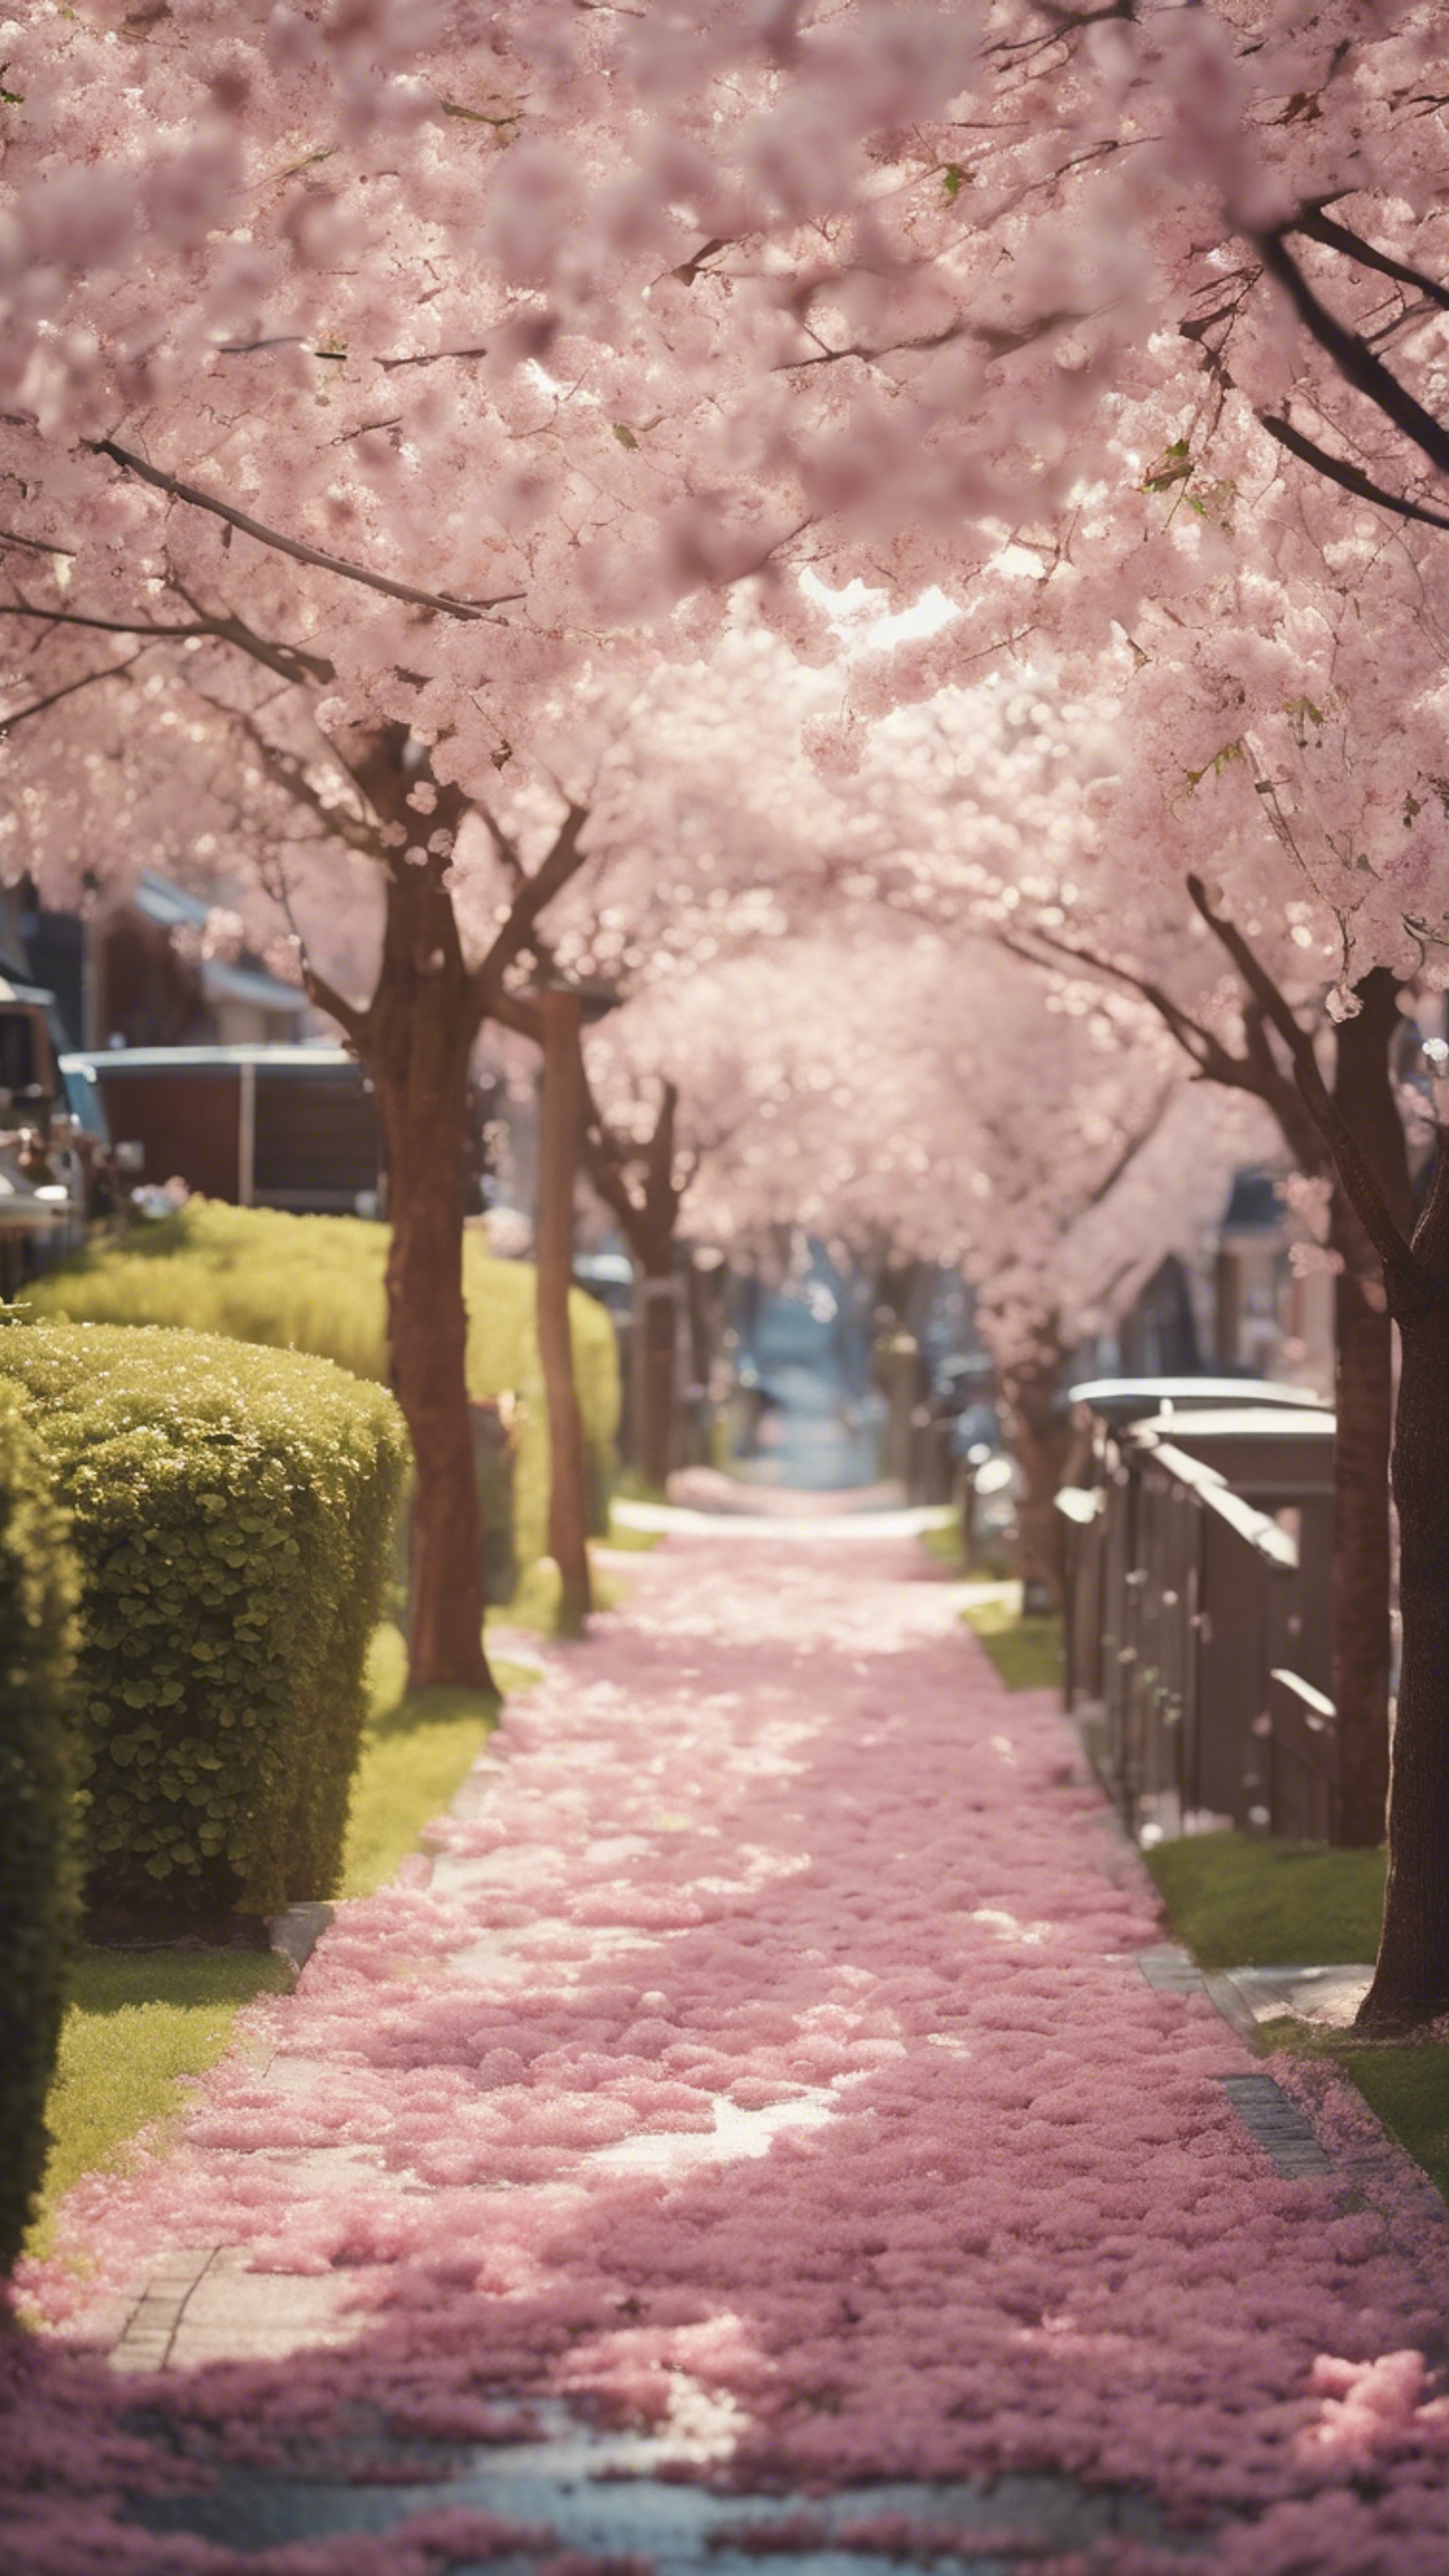 A suburban street lined with houses, and cherry blossom trees showering the pathway with petals, giving an ethereal feel to a sunny spring morning. Kertas dinding[d085be0bf6ea43718843]